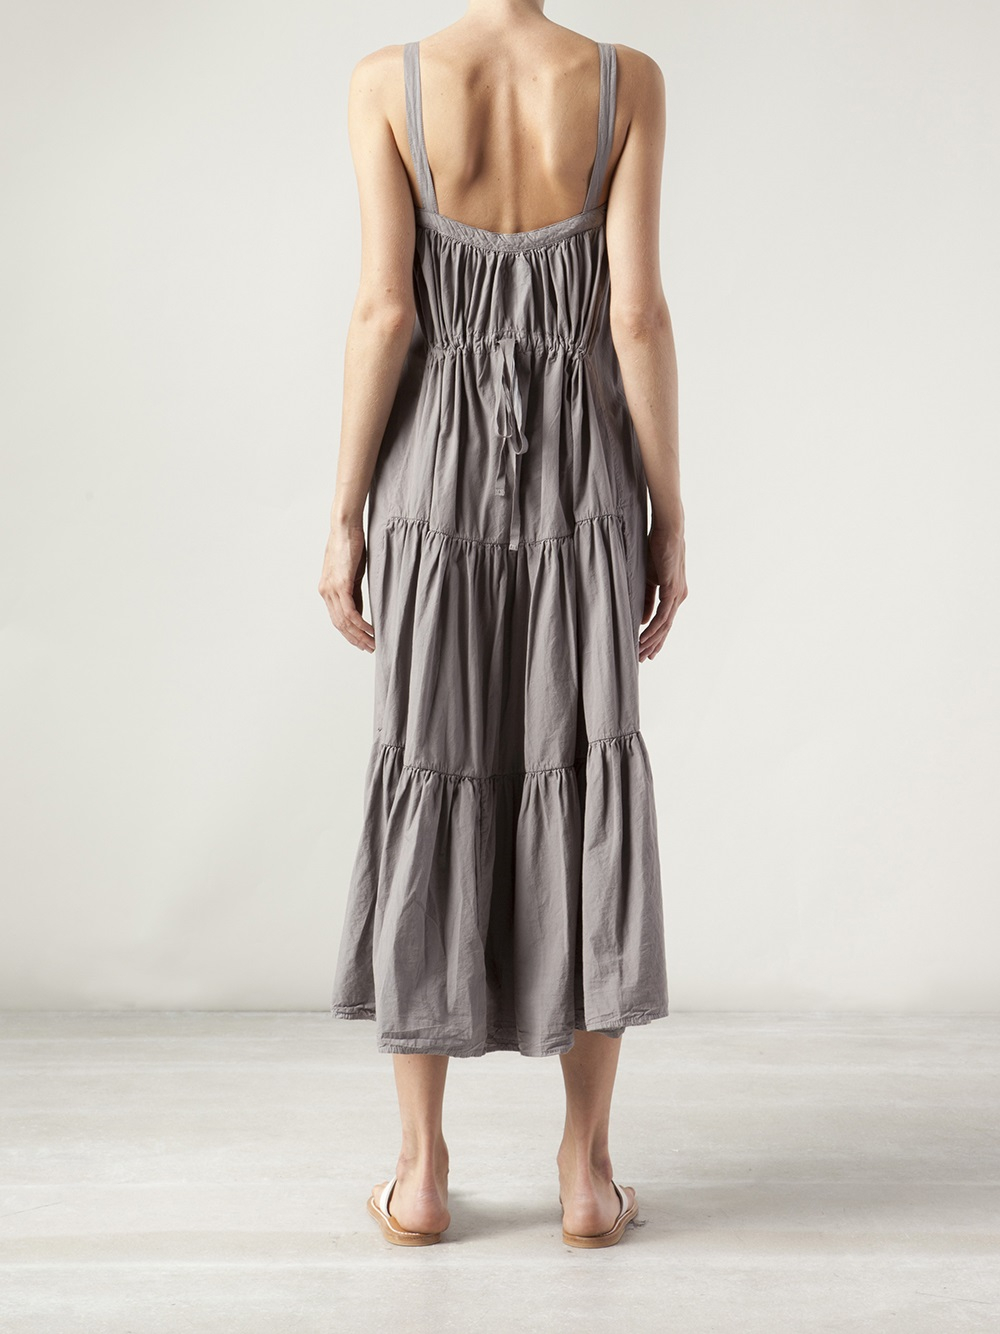 Lyst - Dosa Parachute Dress in Gray